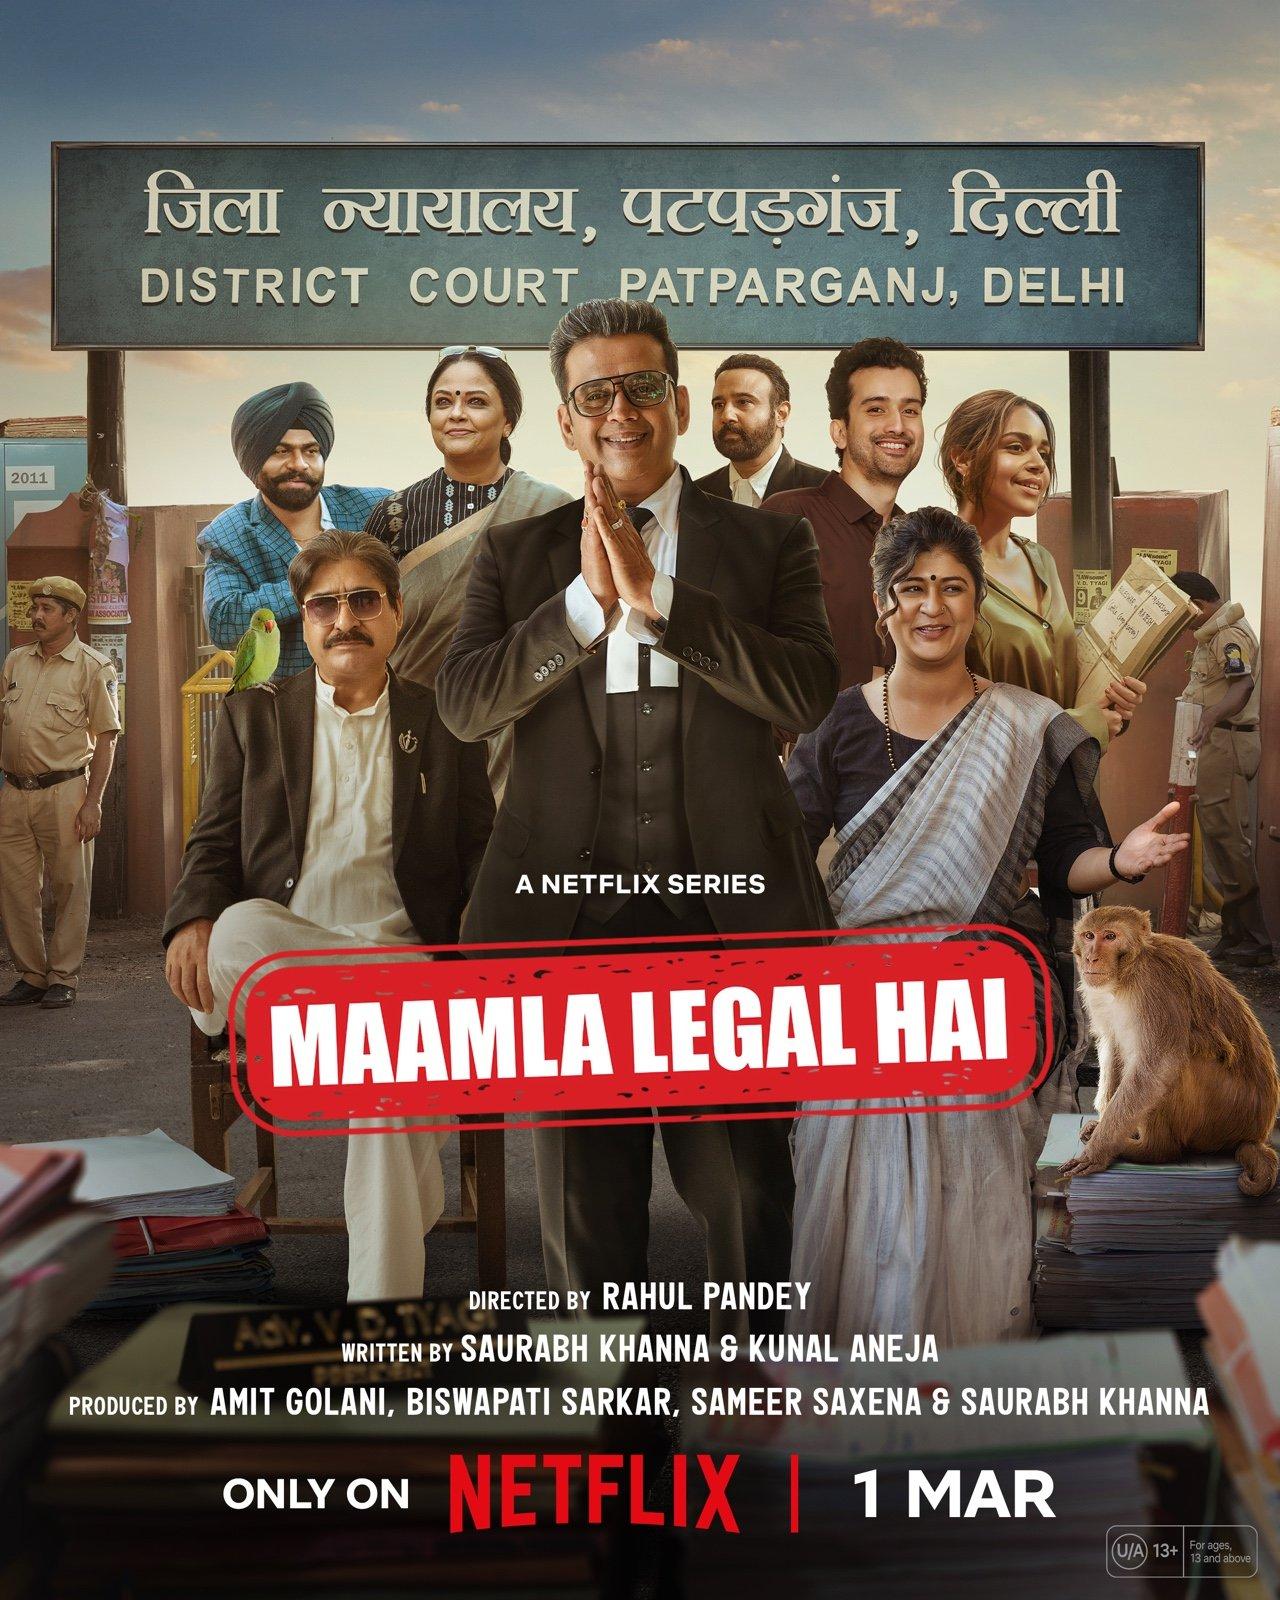 Maamla Legal Hai (March 1) - Streaming on NetflixMaamla Legal Hai unfolds in the bustling corridors of the District Court in Patparganj, New Delhi, where a quirky ensemble of court staff, led by VD Tyagi (Ravi Kishan), navigates through a series of comedic yet thought-provoking legal battles. Their mission is to uphold justice in the face of absurdity, challenging the very fabric of the legal system with wit, humor, and unexpected wisdom. The show also stars Naila Grewal, Yashpal Sharma, and Nidhi Bisht in pivotal roles.